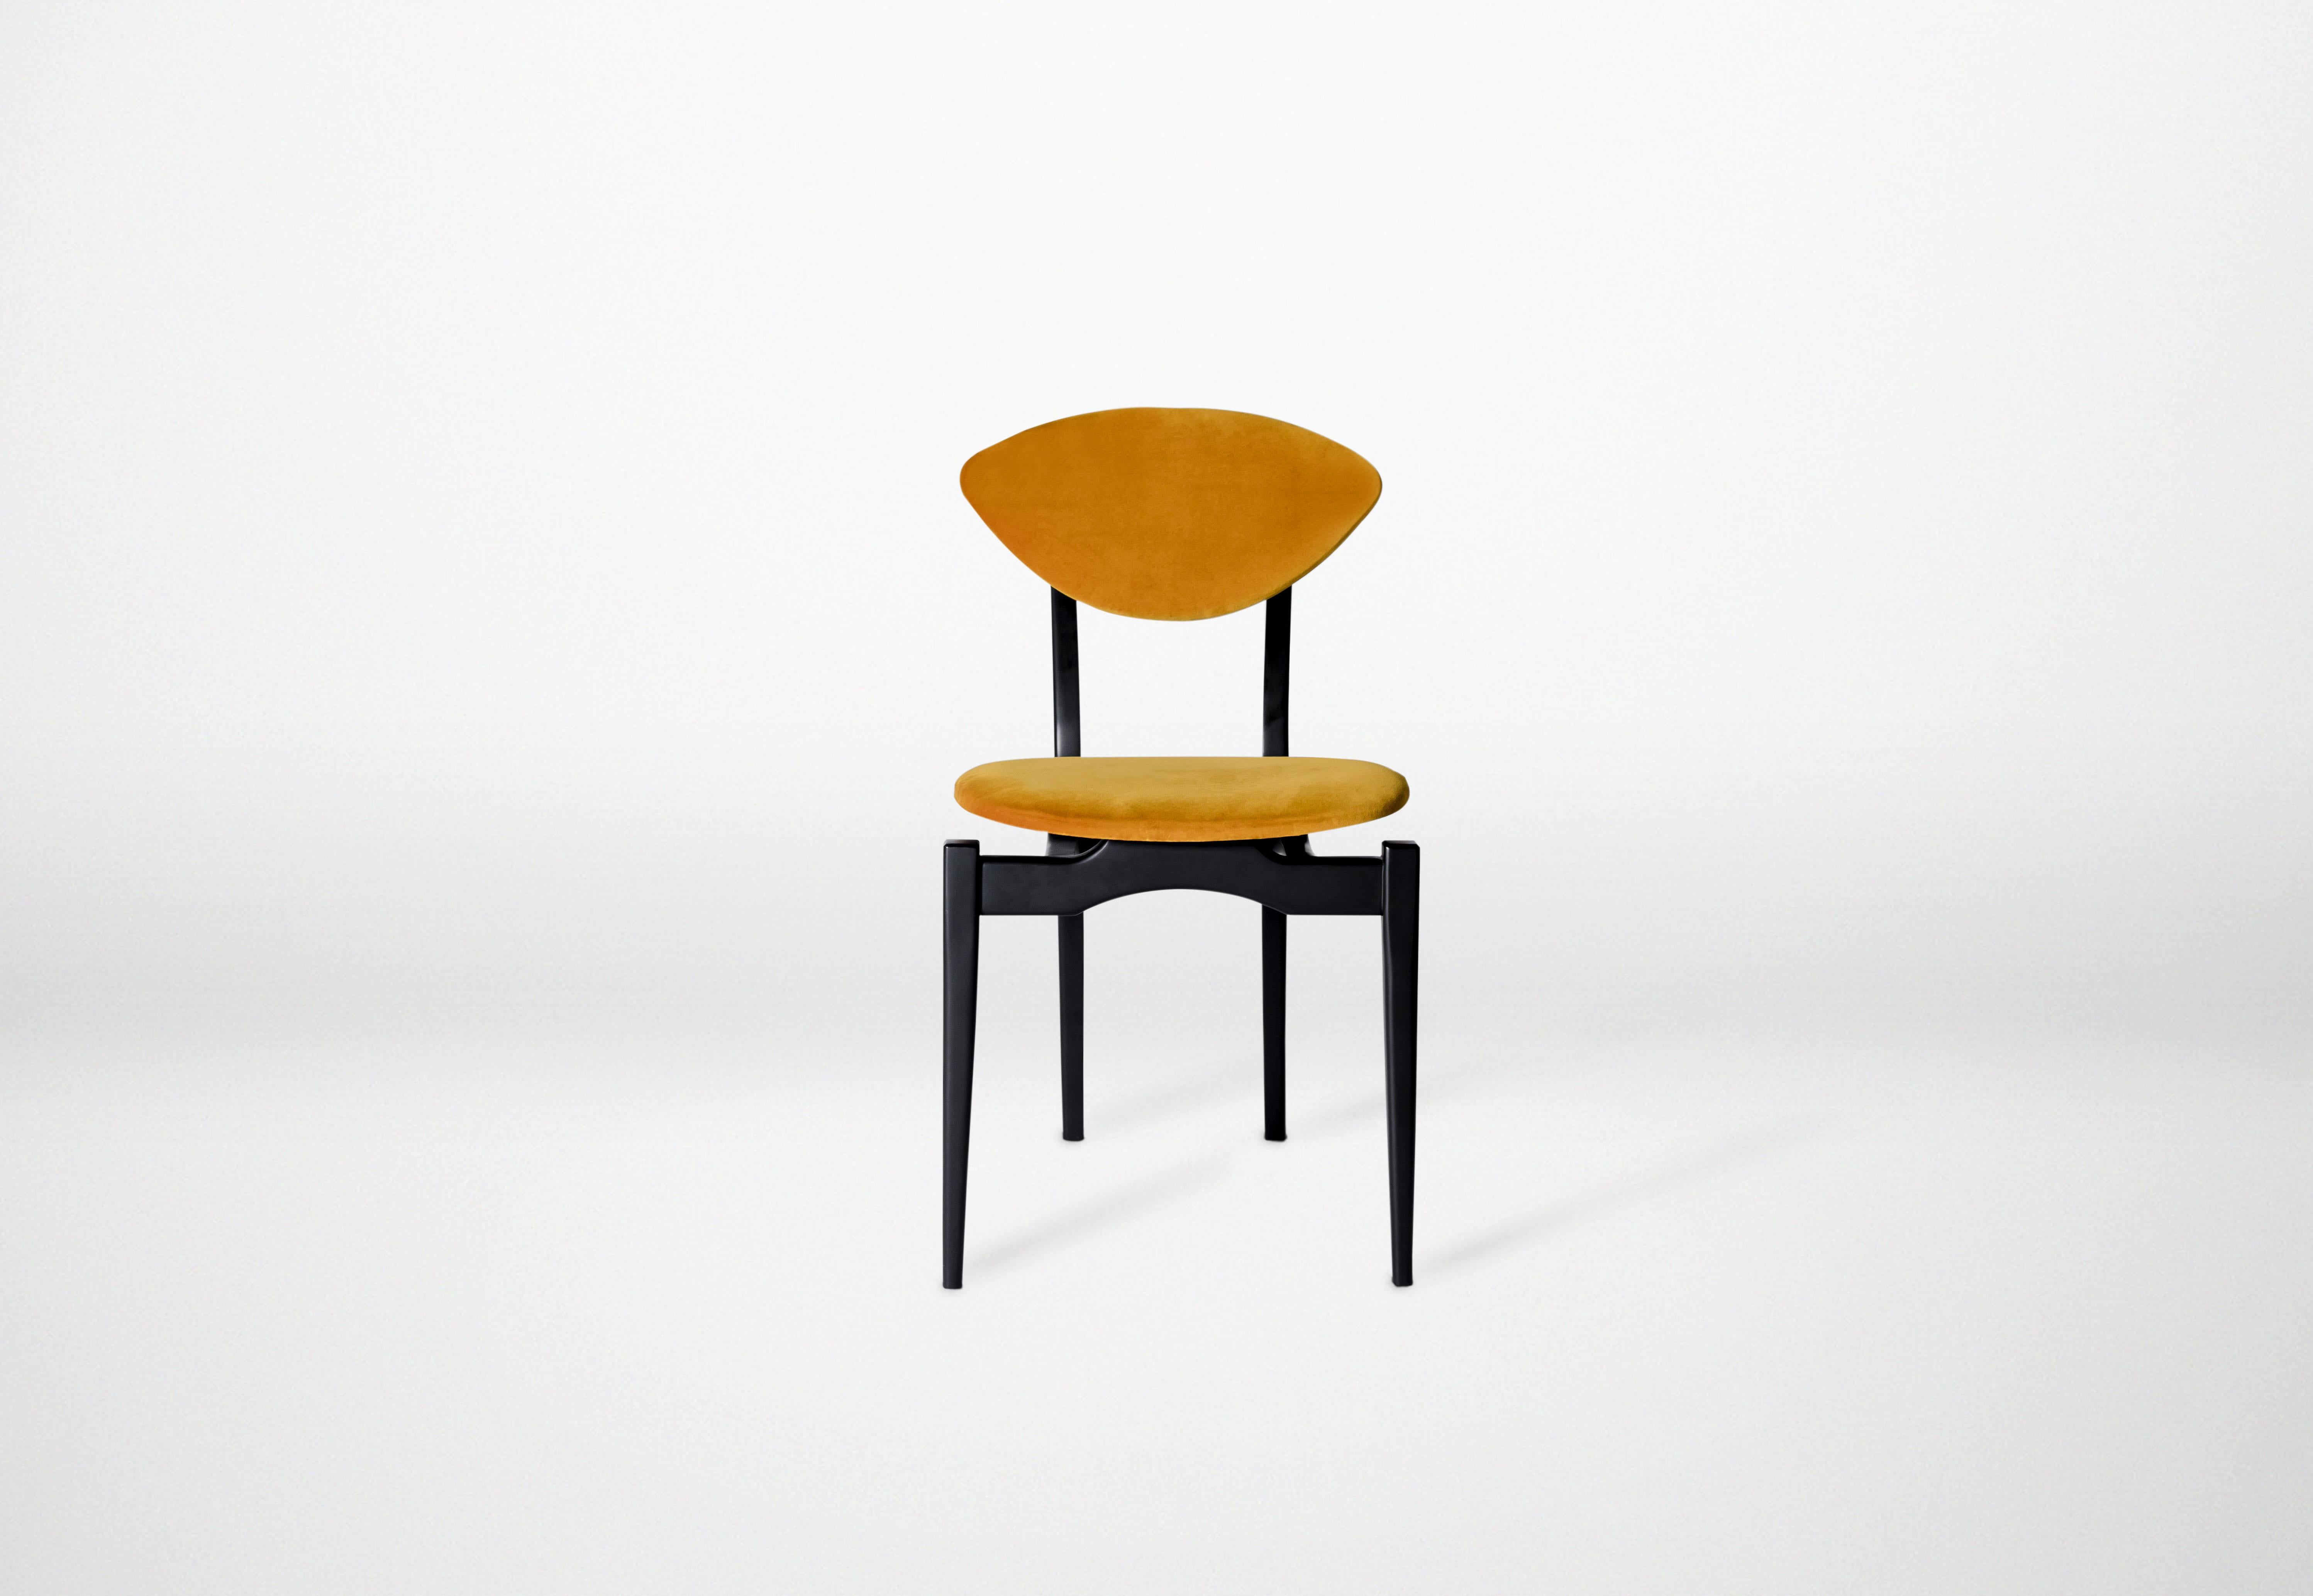 Yellow Femur dining chair by Atra Design.
Dimensions: D 58.5 x W 45 x H 85 cm.
Materials: fabric, walnut.
Available in leather or fabric seat and in other colors.

Atra Design
We are Atra, a furniture brand produced by Atra form a mexico